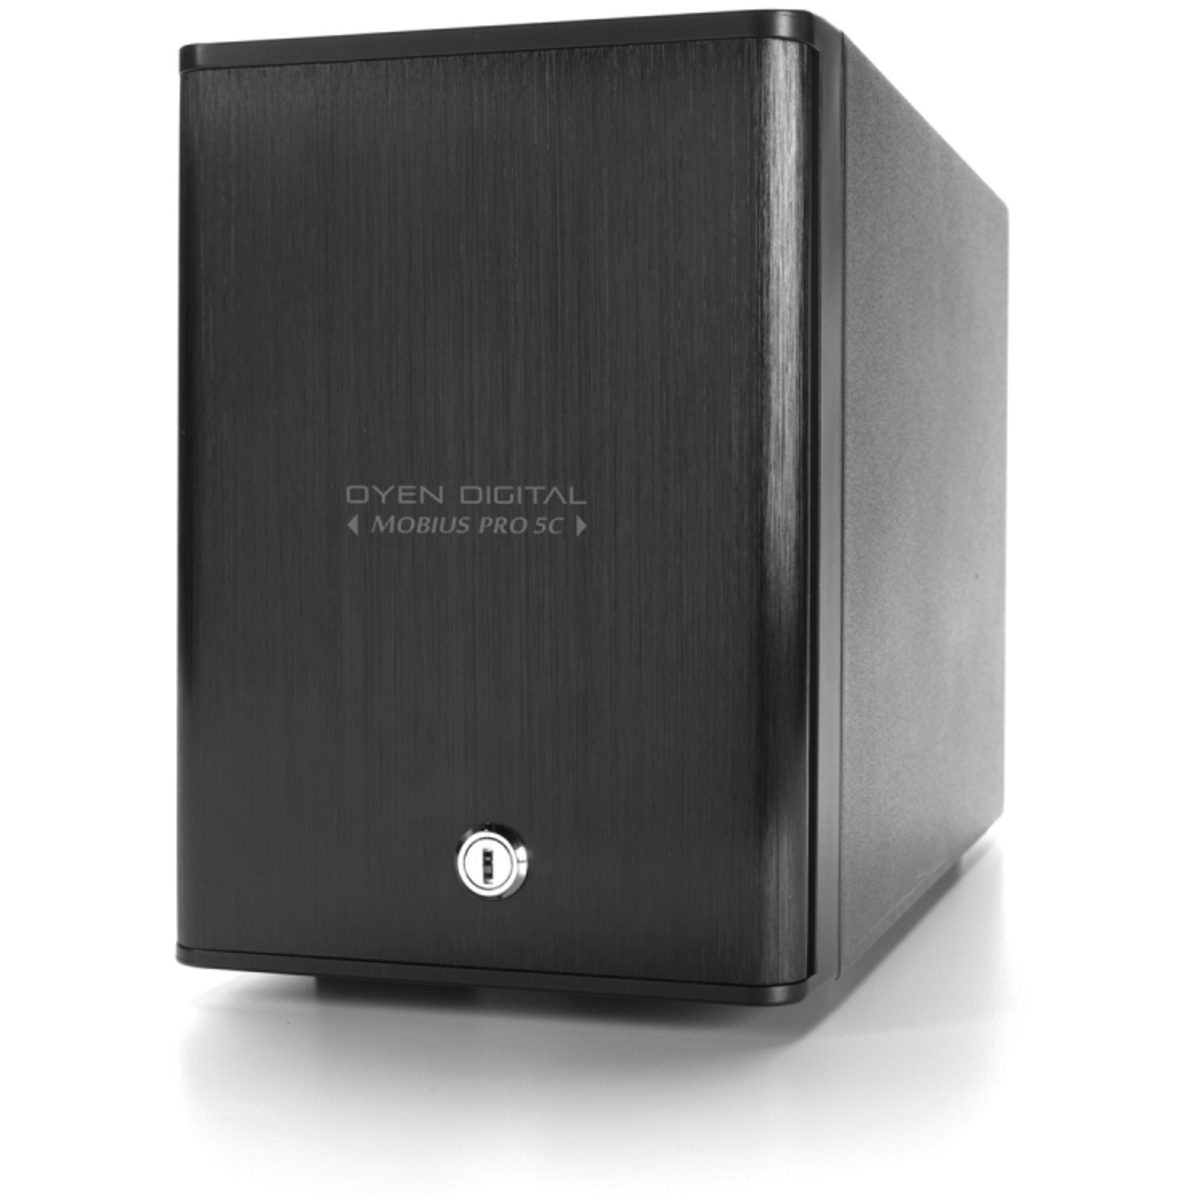 OYEN Mobius Pro 5C 5-Bay USB-C RAID 50tb 5-Bay Desktop Multimedia / Power User / Business DAS - Direct Attached Storage Device 5x10tb Seagate IronWolf Pro ST10000NT001 3.5 7200rpm SATA 6Gb/s HDD NAS Class Drives Installed - Burn-In Tested - ON SALE Mobius Pro 5C 5-Bay USB-C RAID